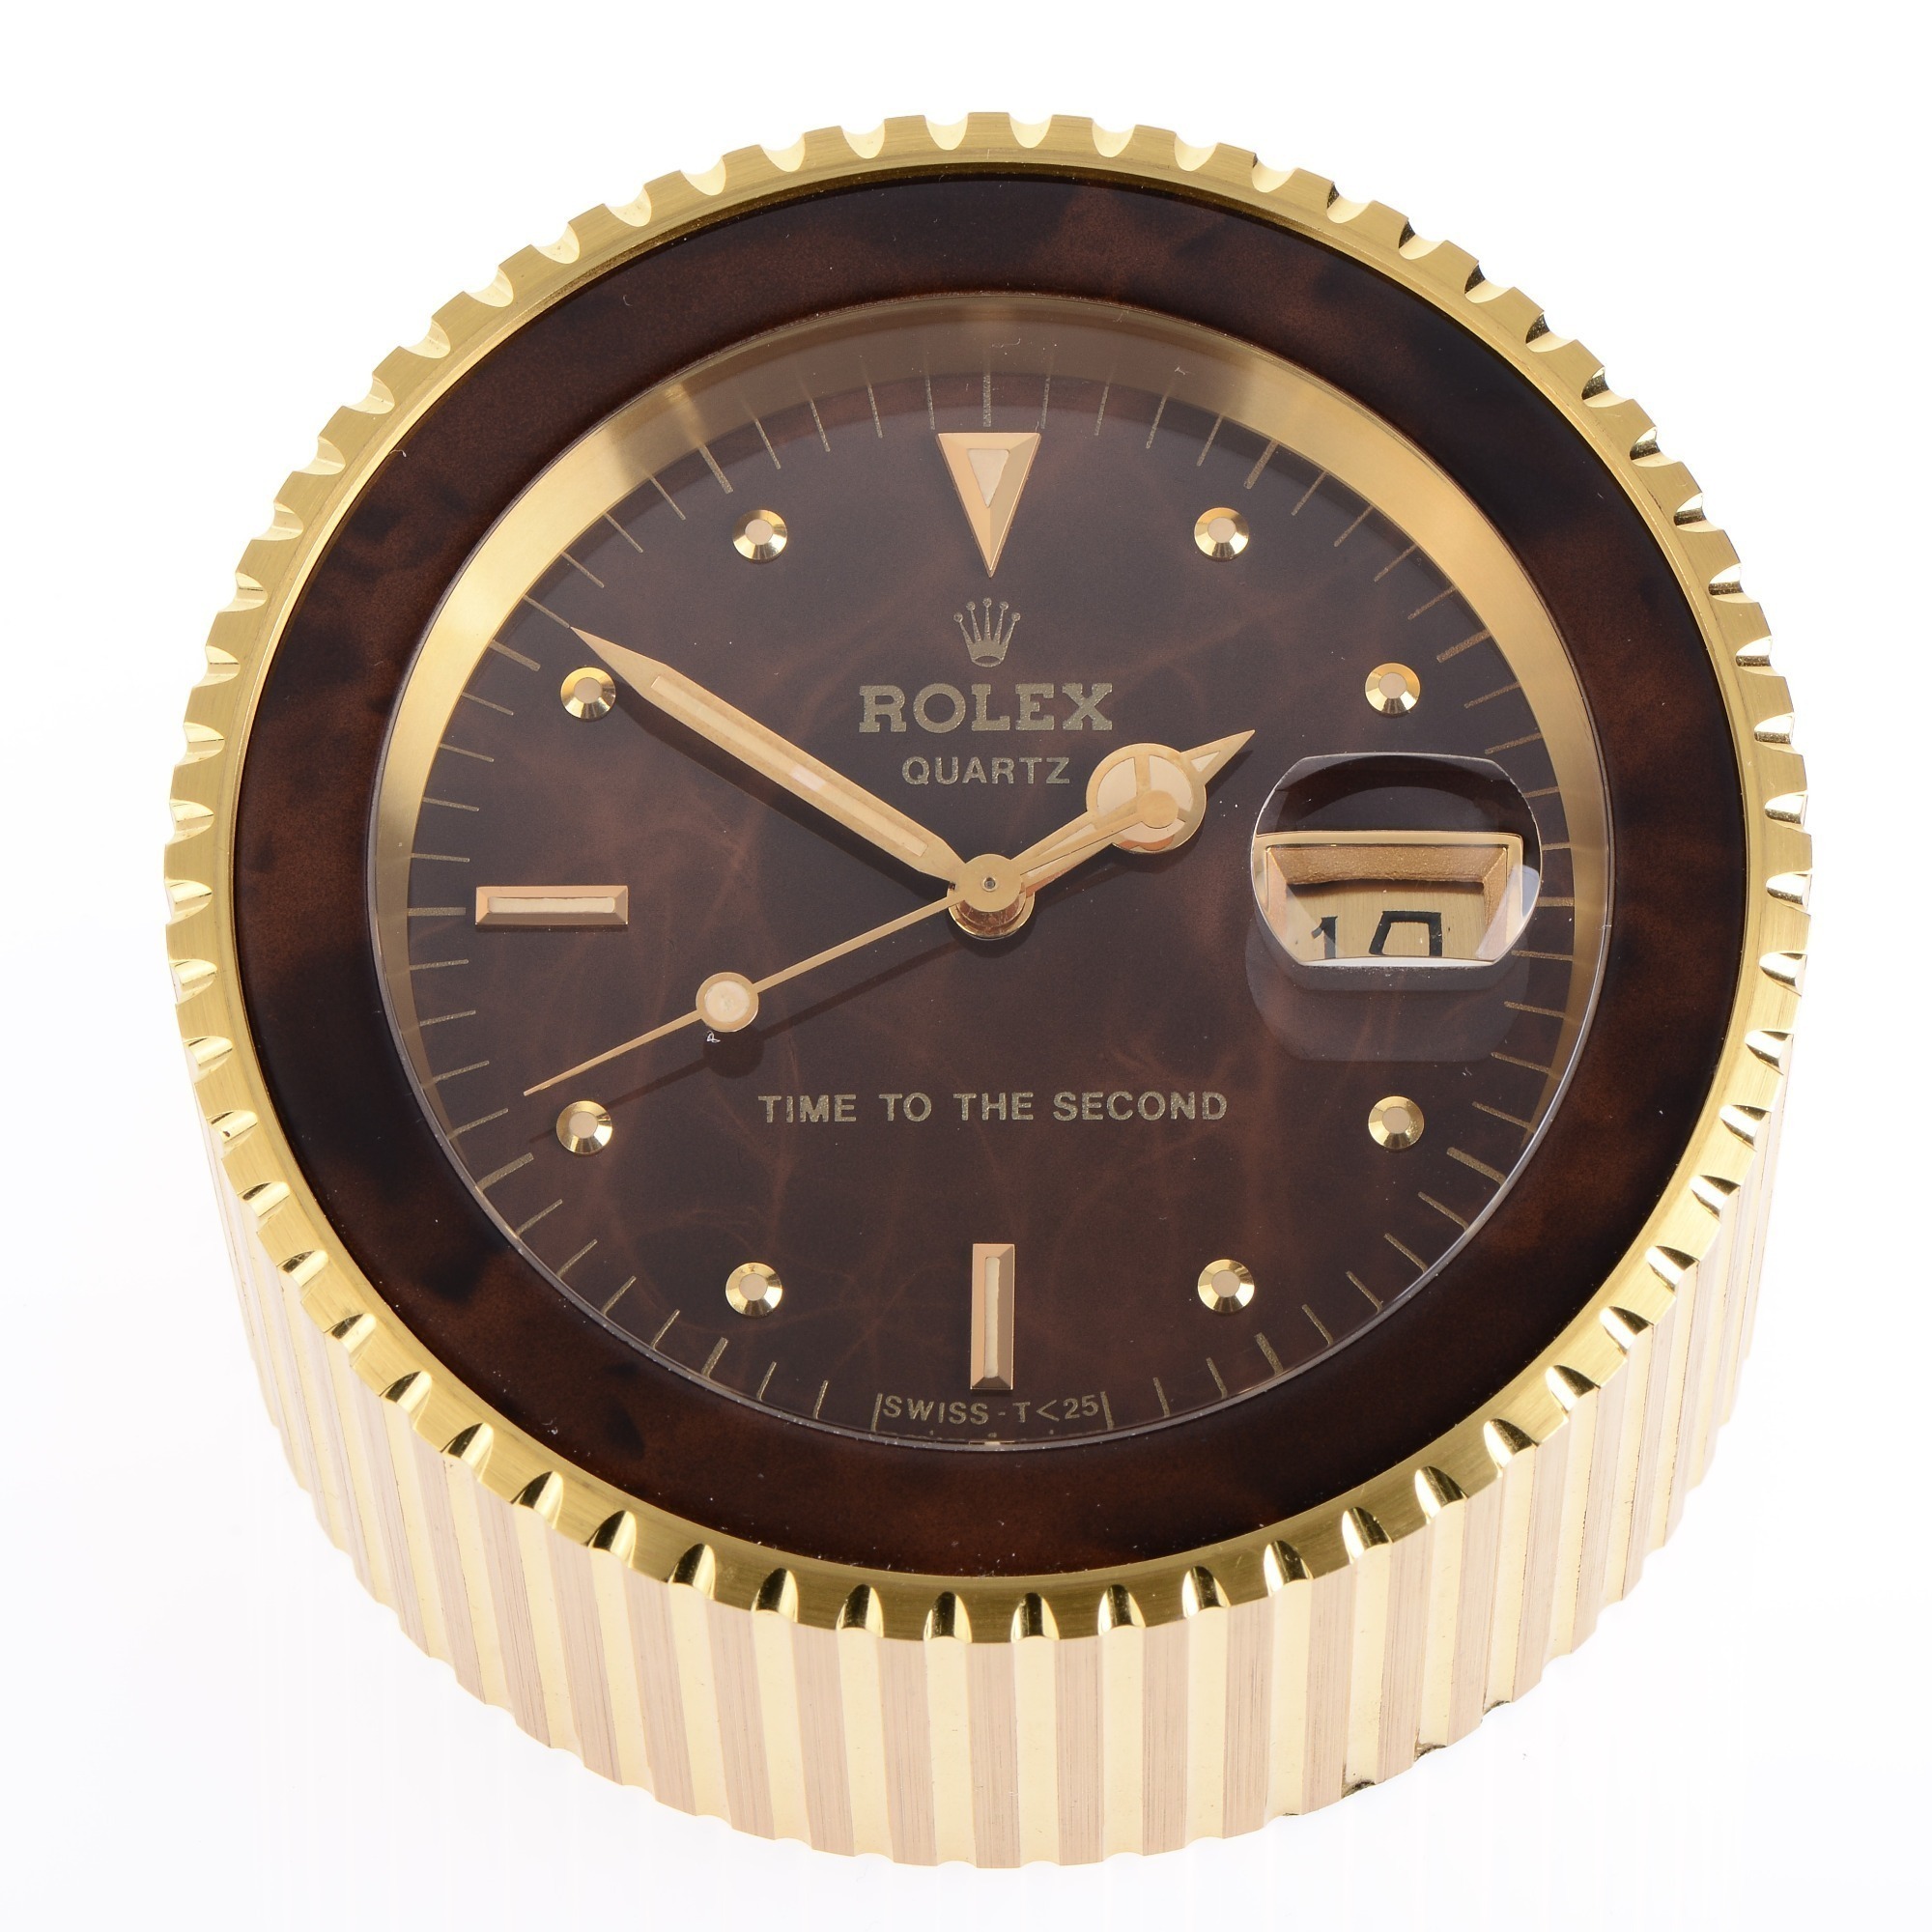 Rolex Ref. 455 Time To The Second Display Desk Clock